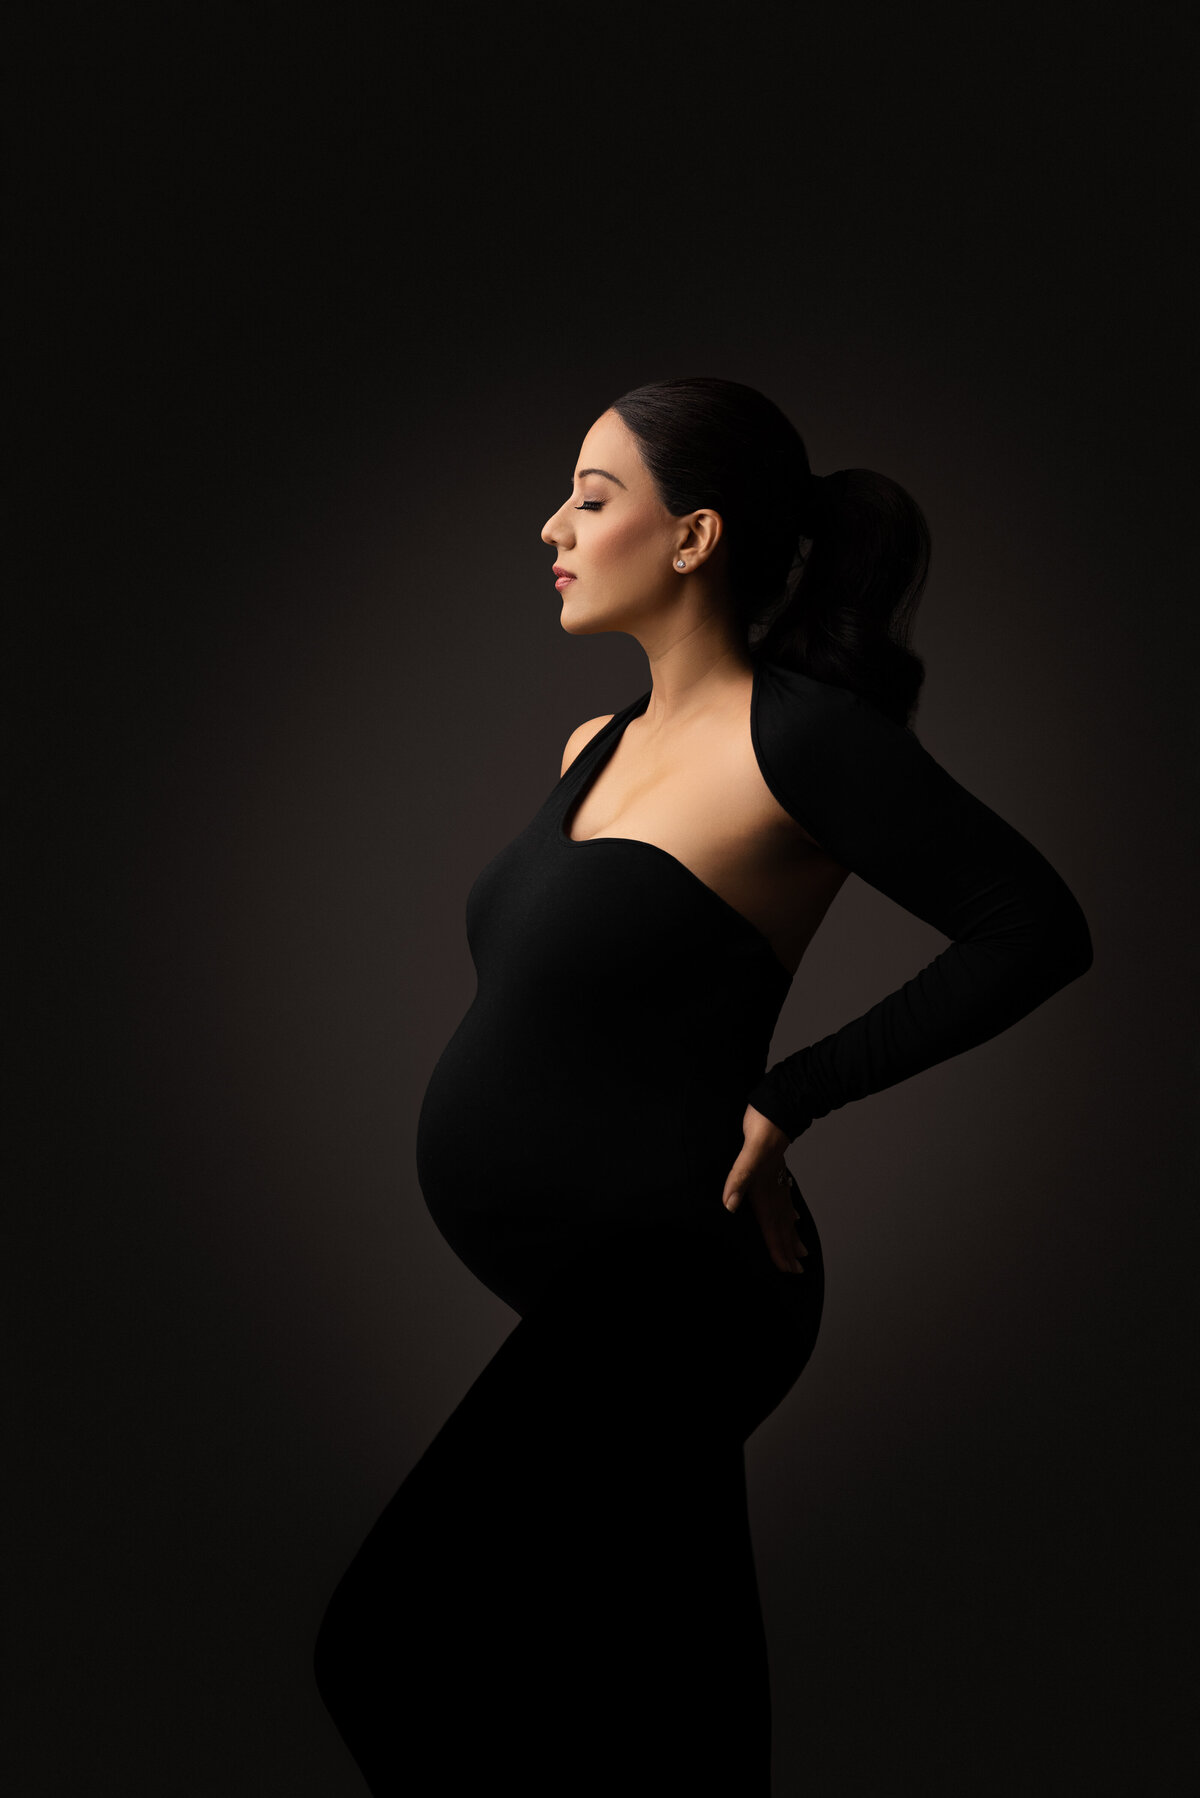 In this artistic, fine art photo captured by New Jersey's best maternity photographer Katie Marshall, an expectant mom is standing side-profile to the camera. The woman is in a luxurious maternity one-sleeve body-con dress is standing side profile to the camera. Her hands are resting on the small of her back.  The woman's eyes are closed and  featuring the side profile of her face.